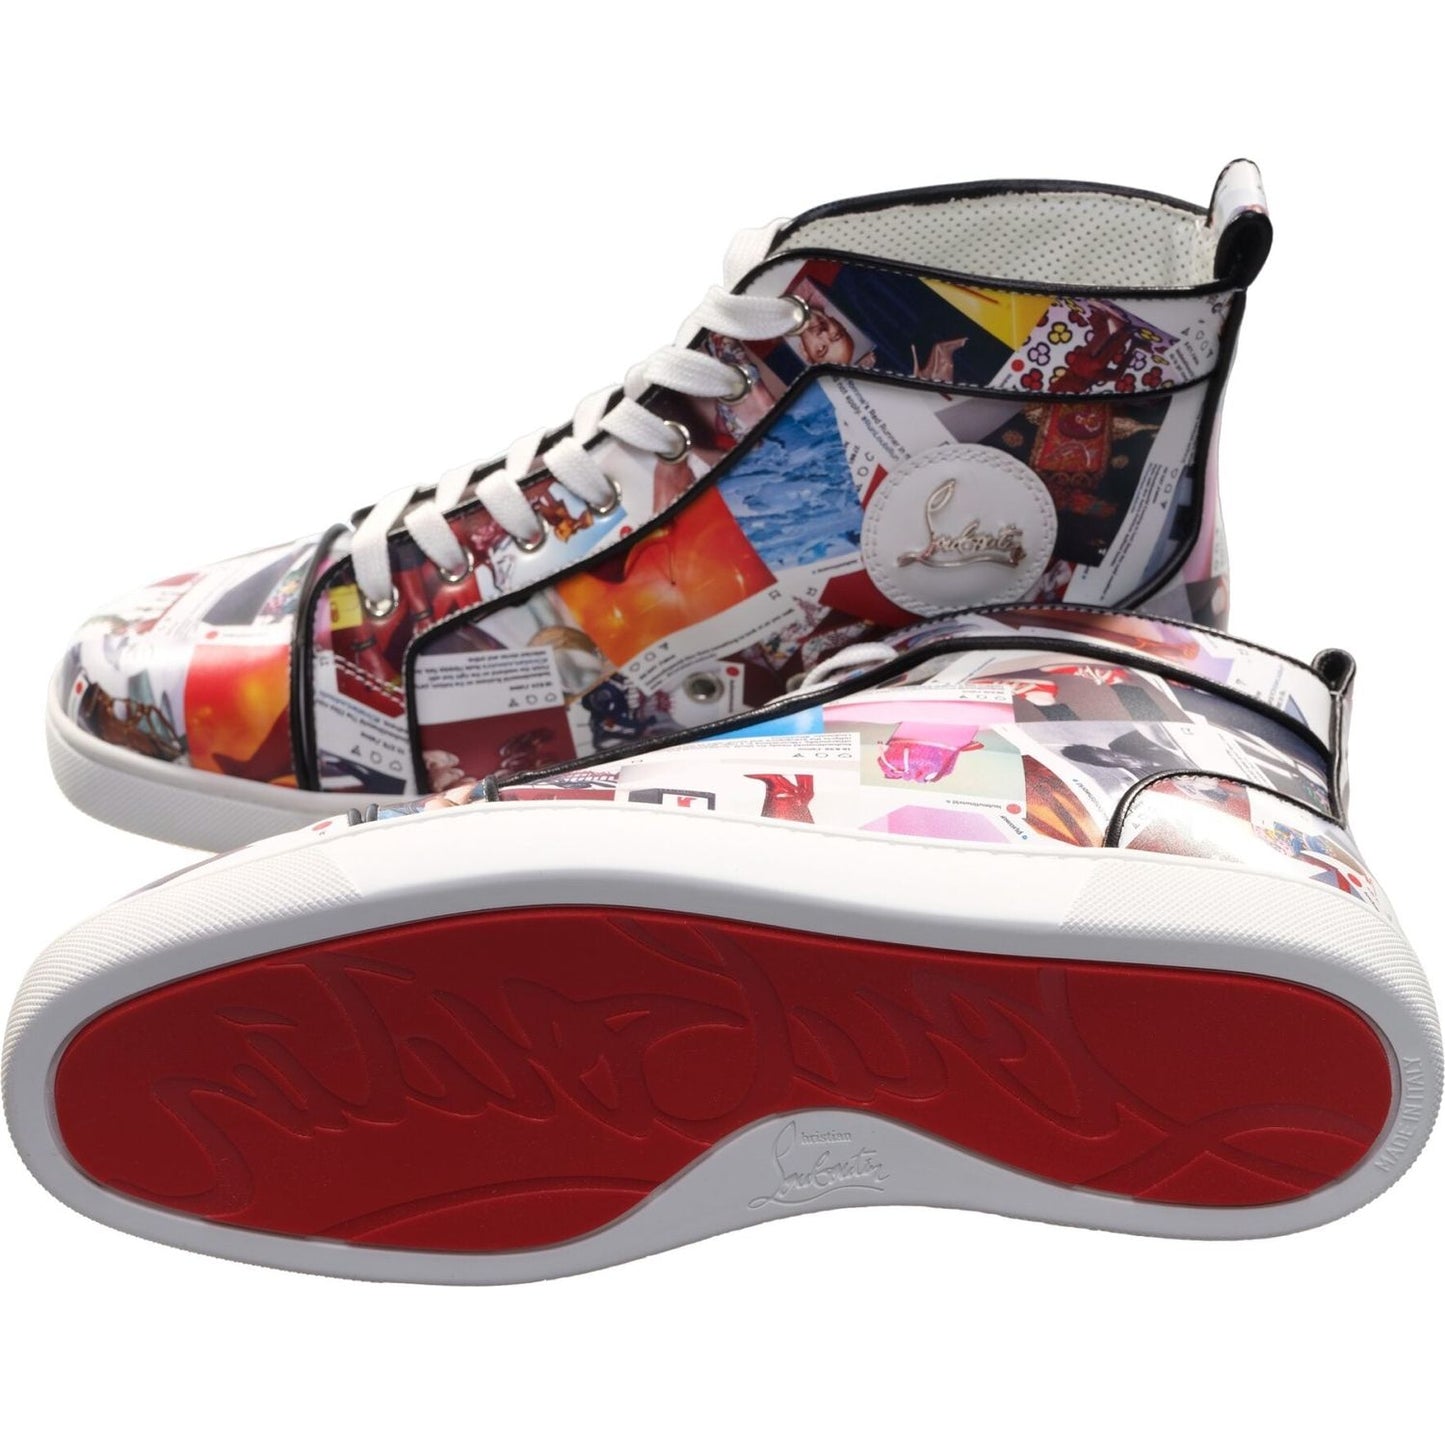 Louis Orlato Flat Leather Printed High Top Sneakers